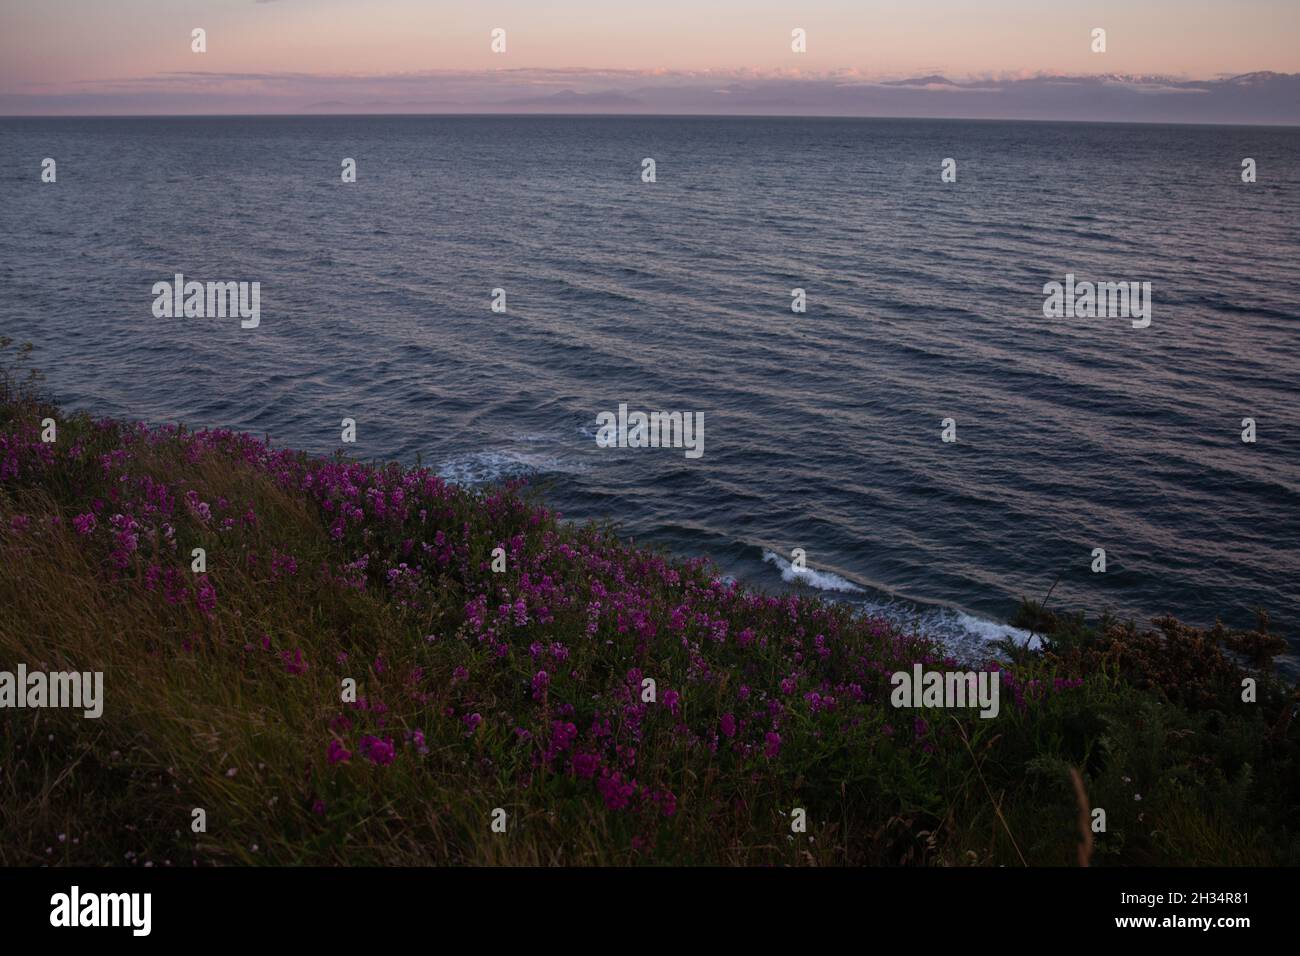 https://c8.alamy.com/comp/2H34R81/a-beautiful-summer-sunset-was-photographed-from-spiral-beach-in-victoria-canada-the-view-is-of-the-olympic-mountains-range-across-the-salish-sea-2H34R81.jpg